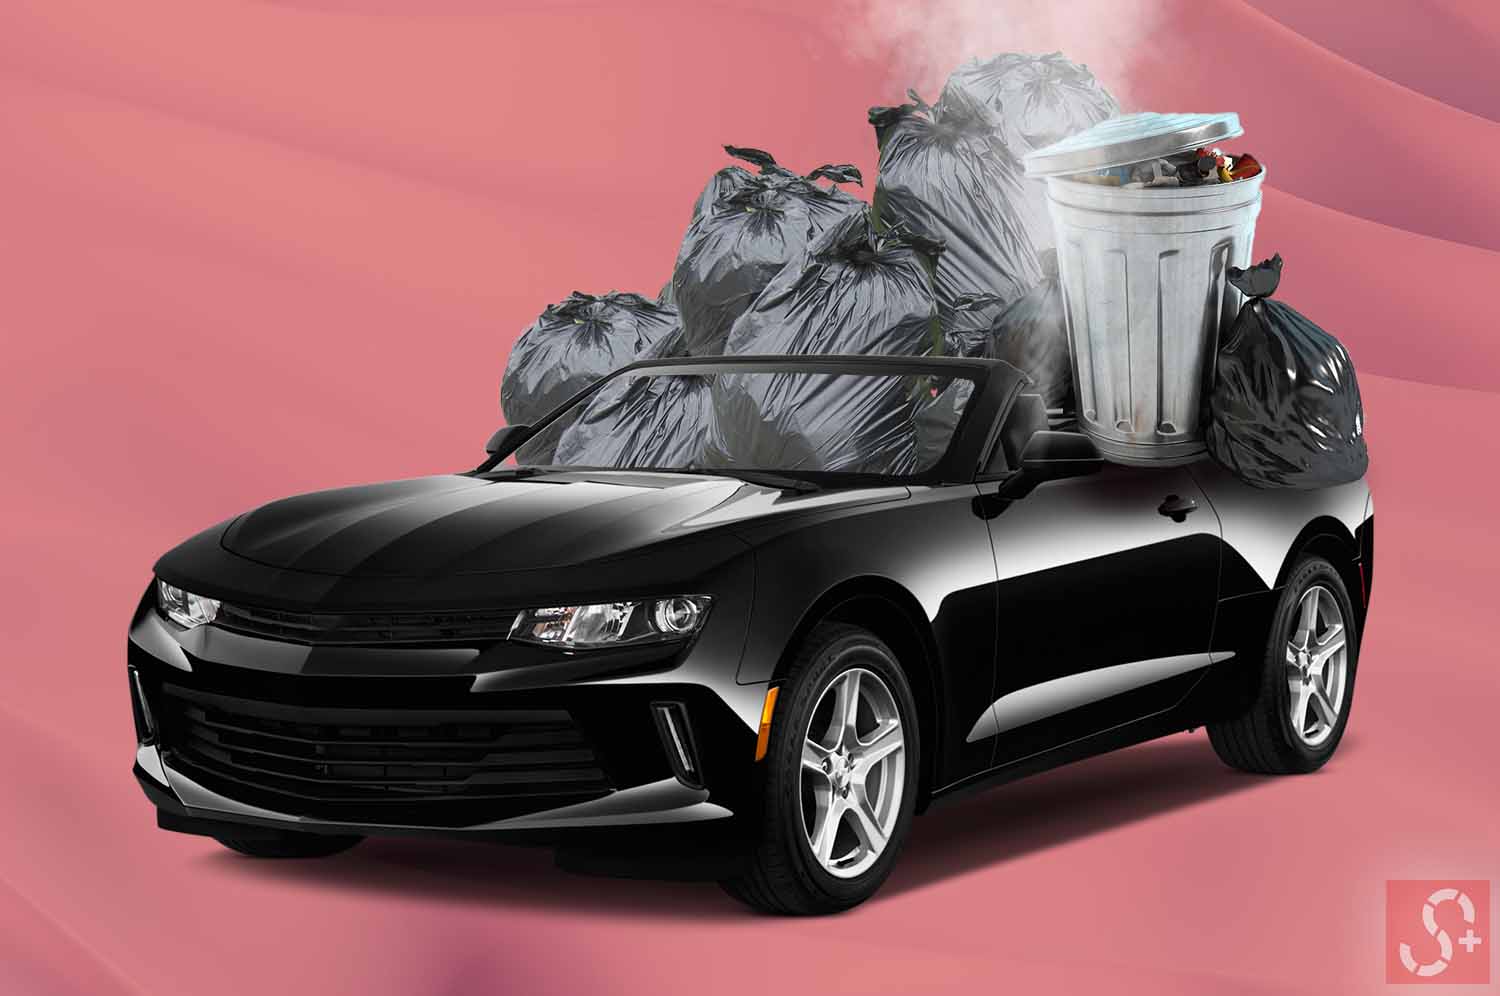 Garbage inside a Car in front of pink background